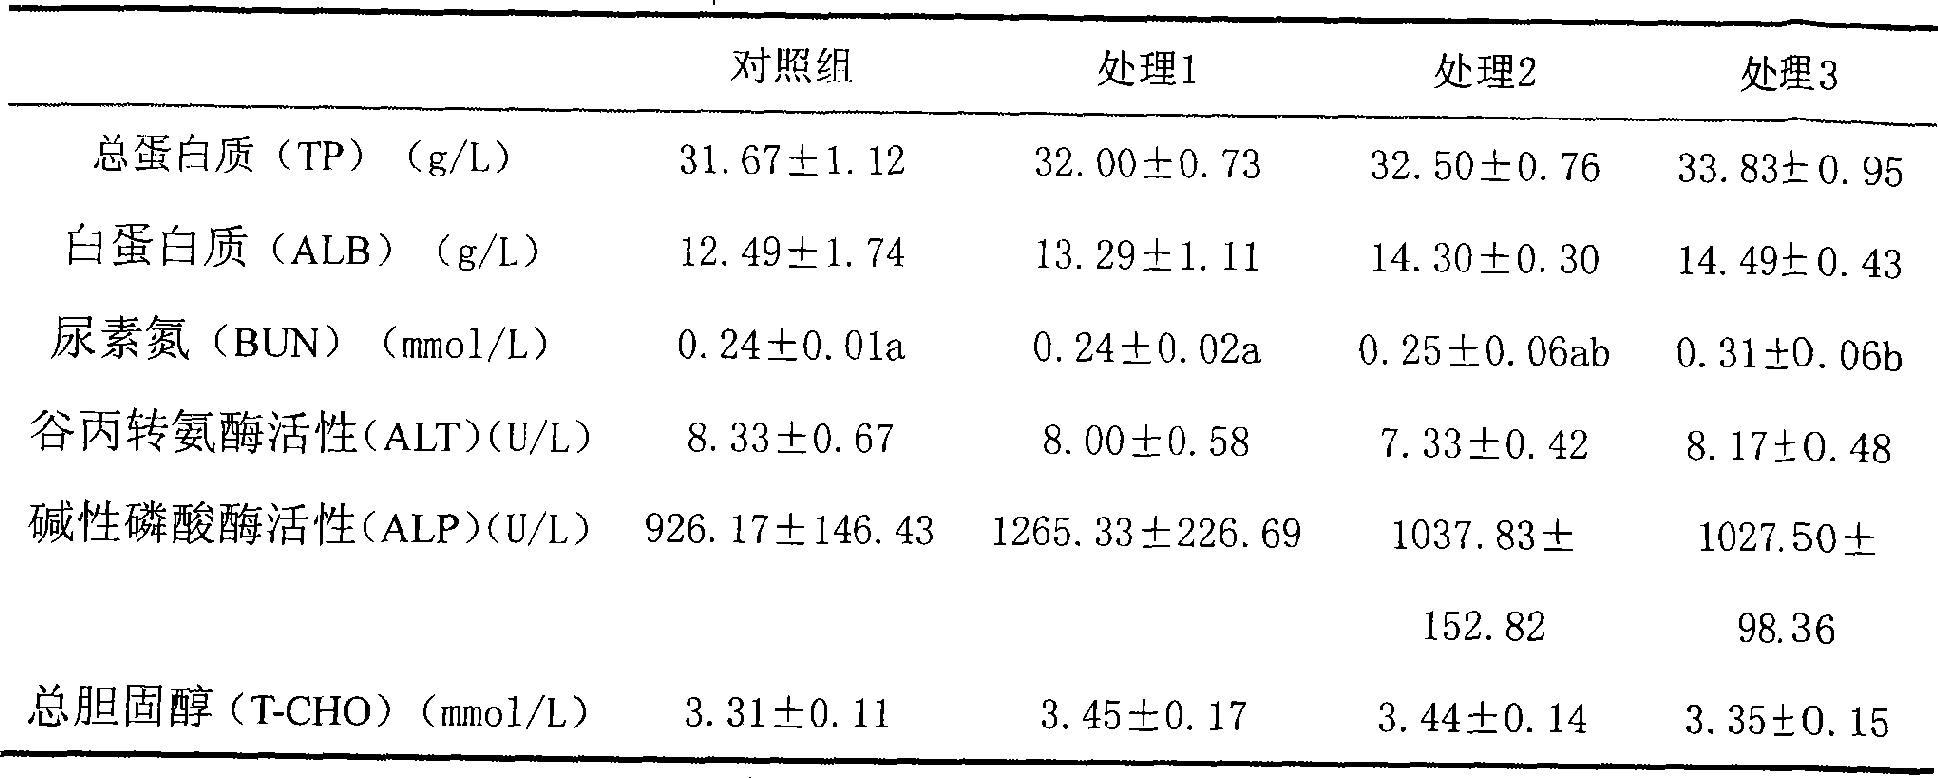 Preparation method of fermented bean pulp rich in function peptide for feeding